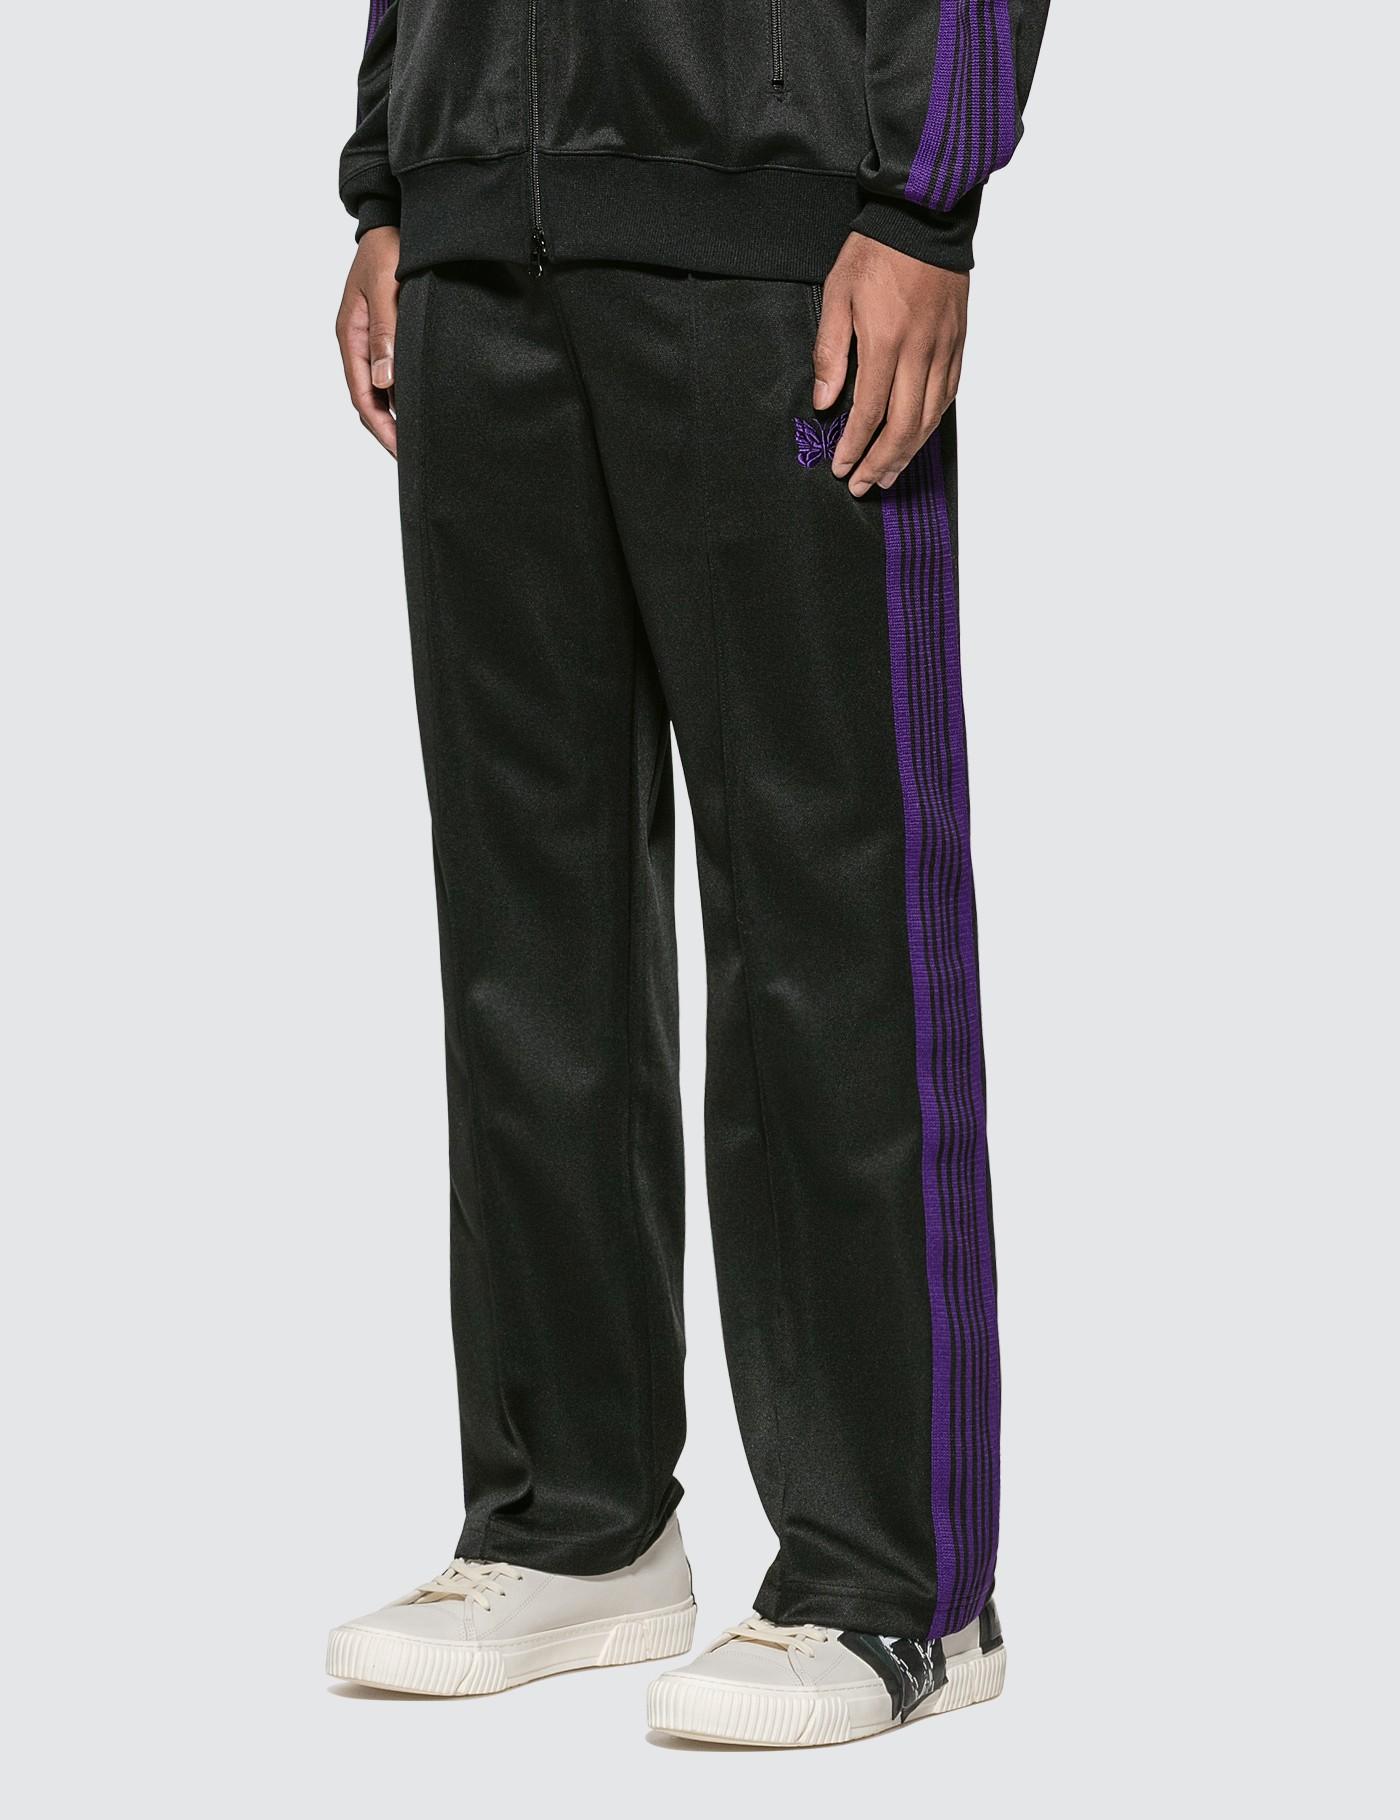 Needles Synthetic Track Pants in Black for Men - Lyst